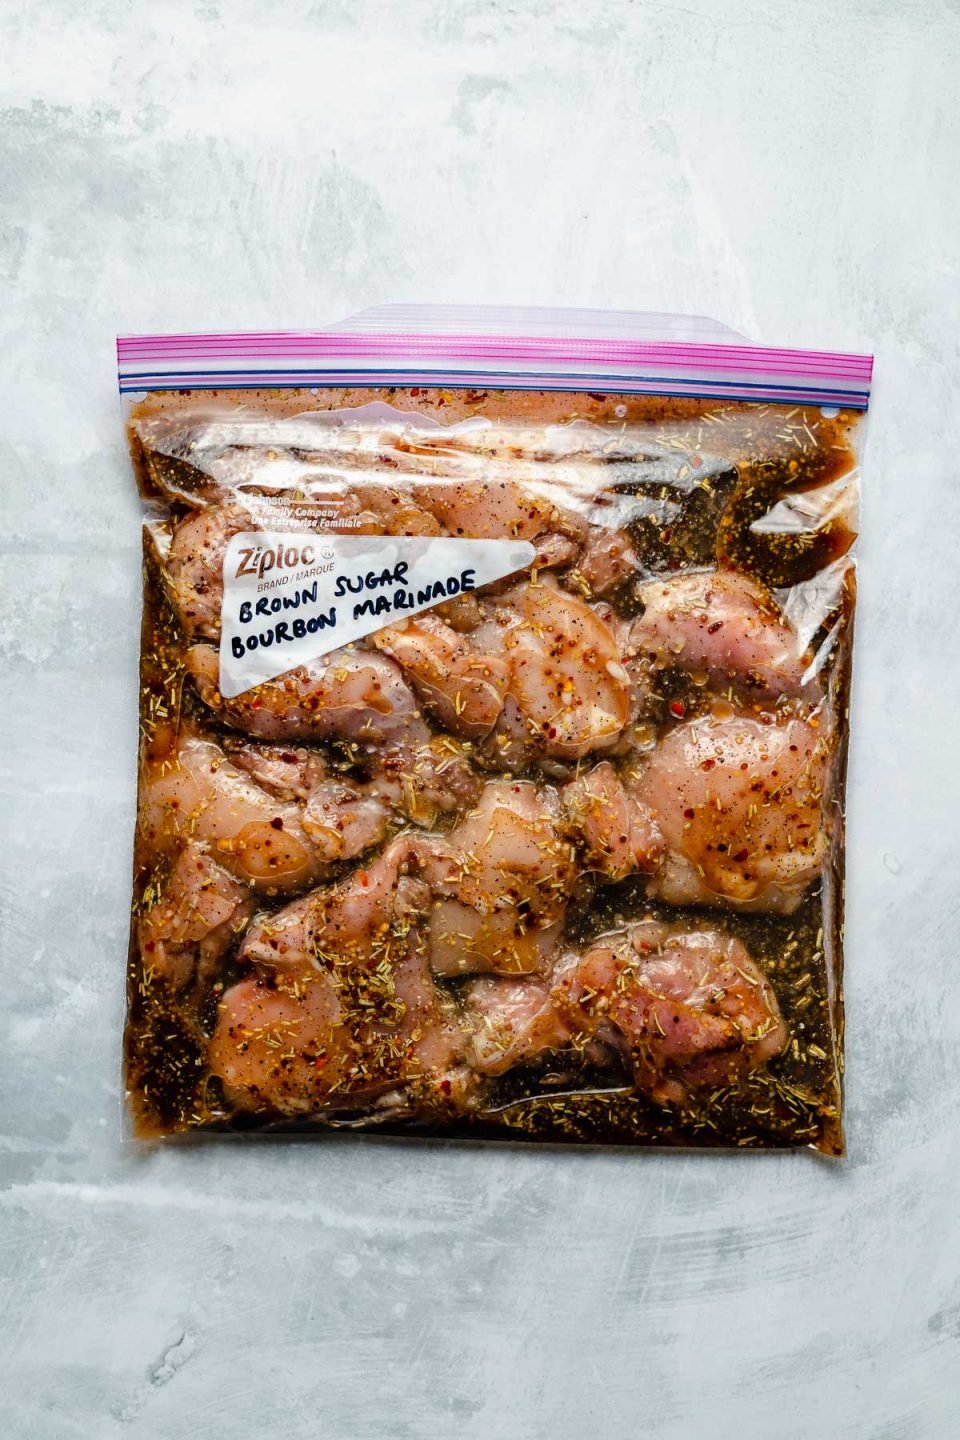 Chicken thighs in a Ziploc bag, marinating in Brown Sugar Bourbon marinade. The bag sits atop a light blue surface. “Brown Sugar Bourbon Marinade" is penned in the bag's memo area.